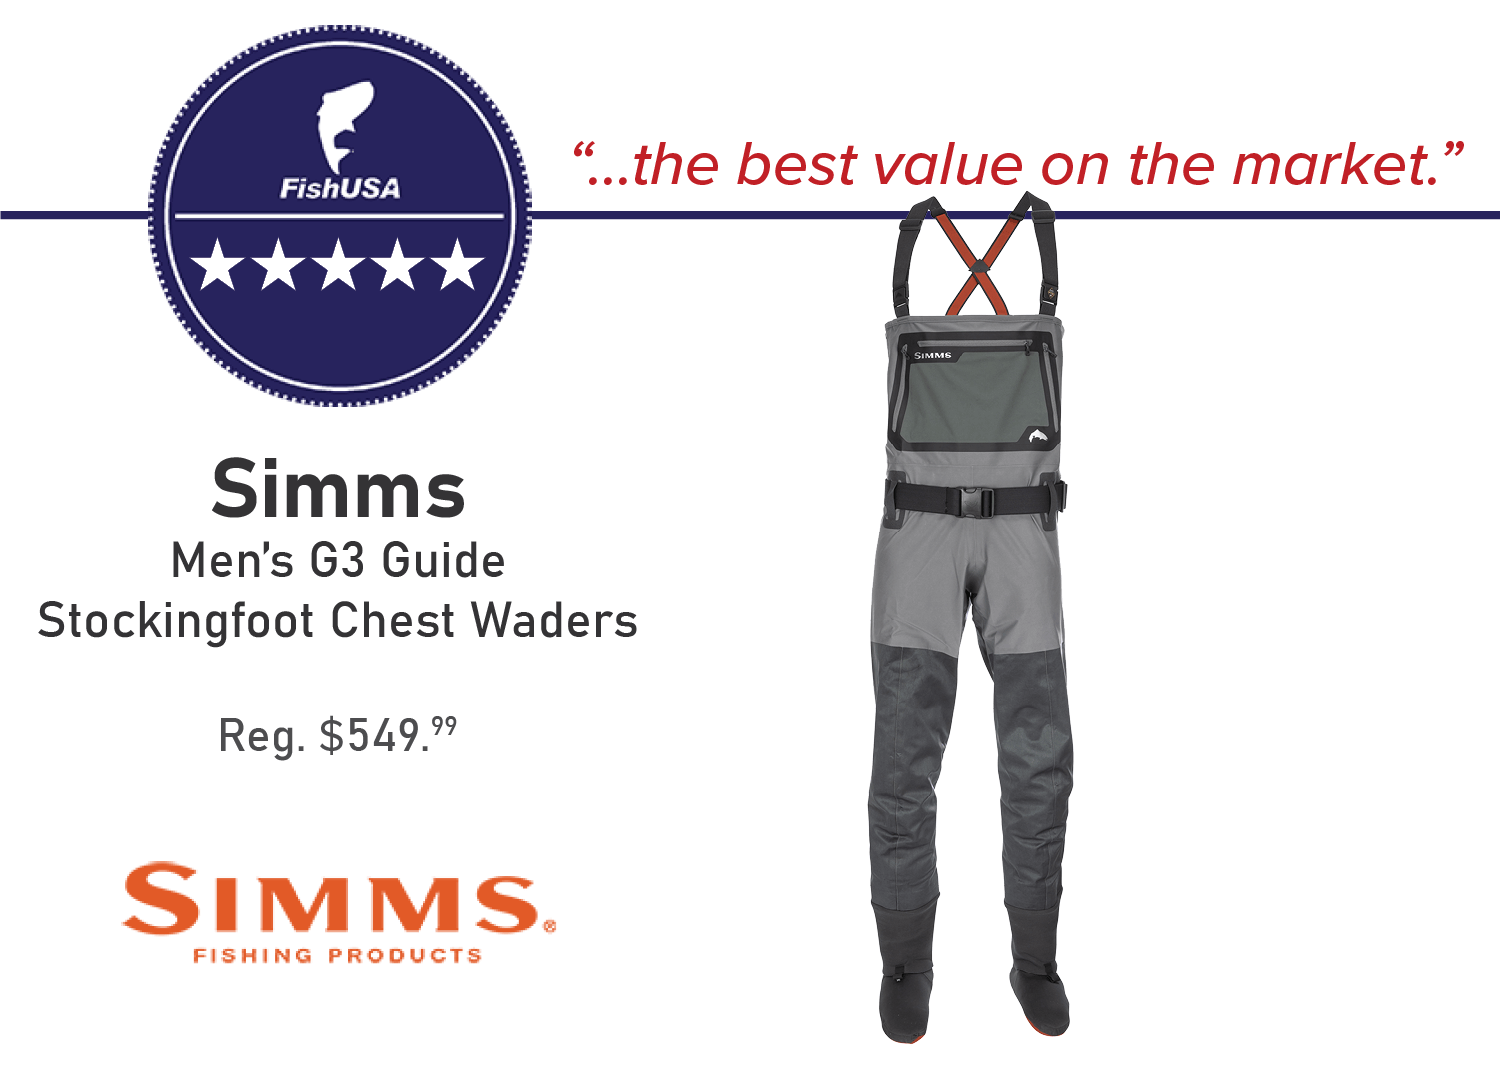 Simms Men's G3 Guide Stockingfoot Chest Waders